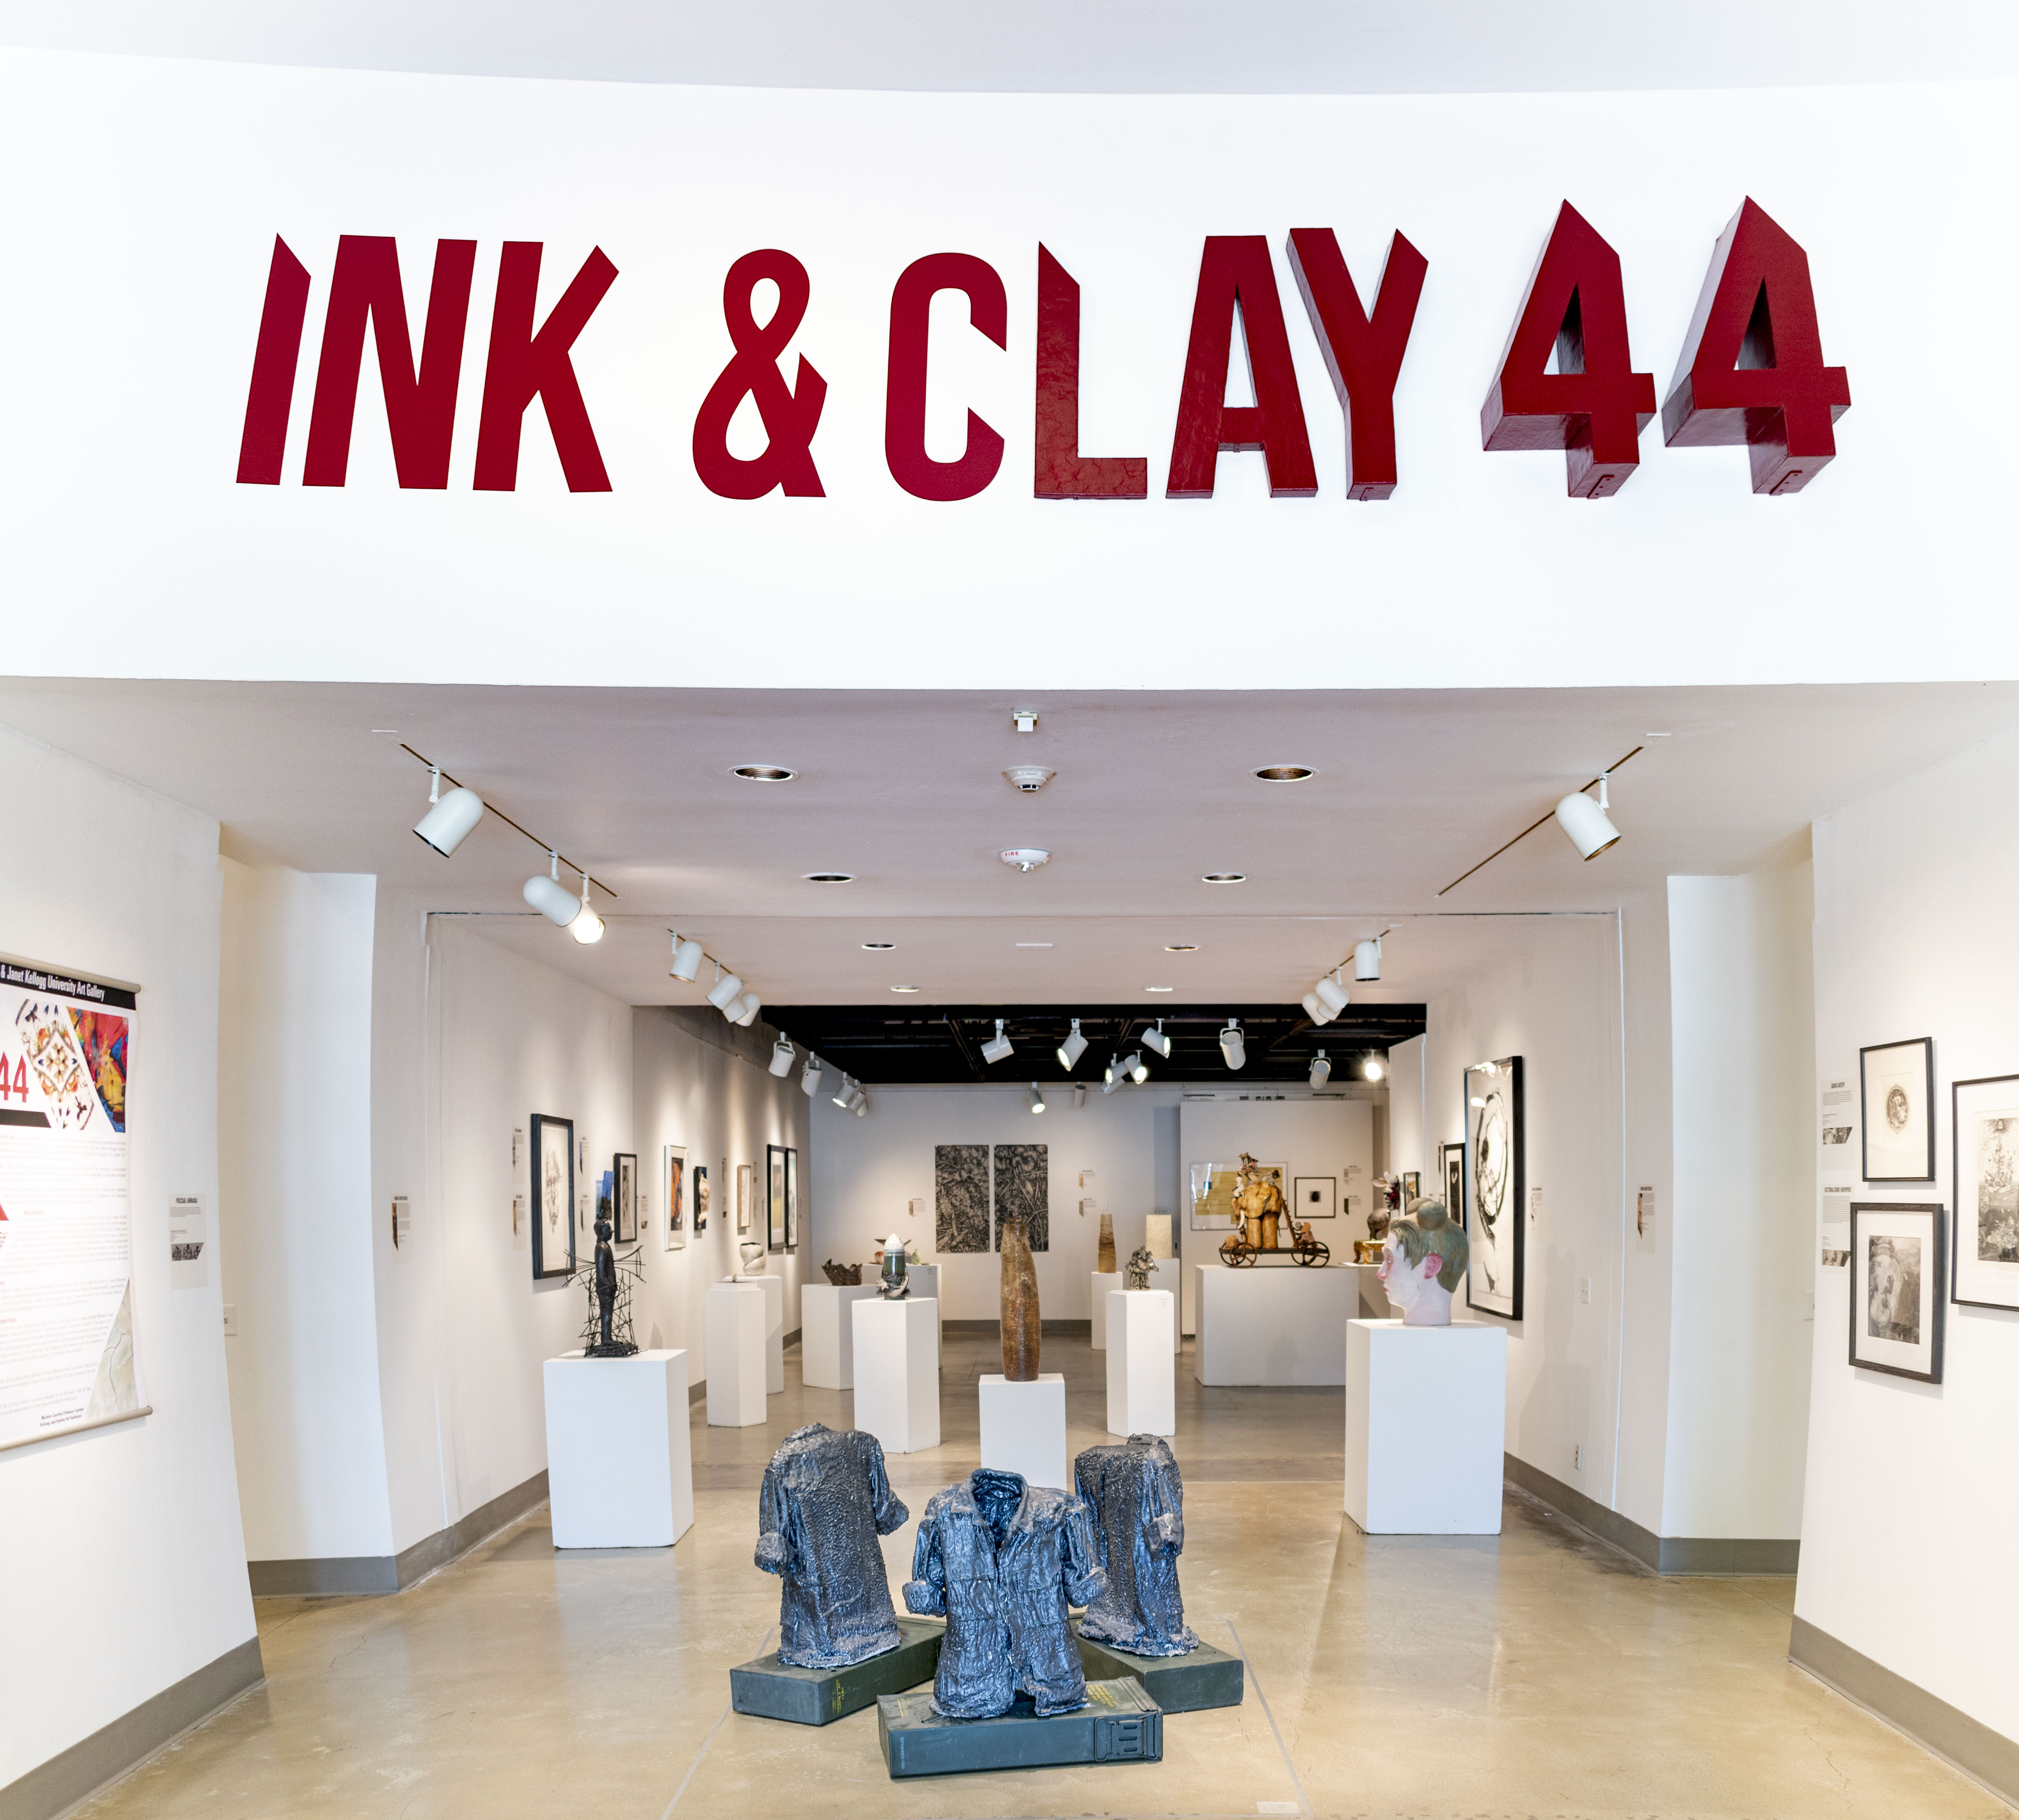 Installation View, Title Wall, Ink & Clay 44 Exhibition, Aug. 22, 2019 to Nov. 21, 2019